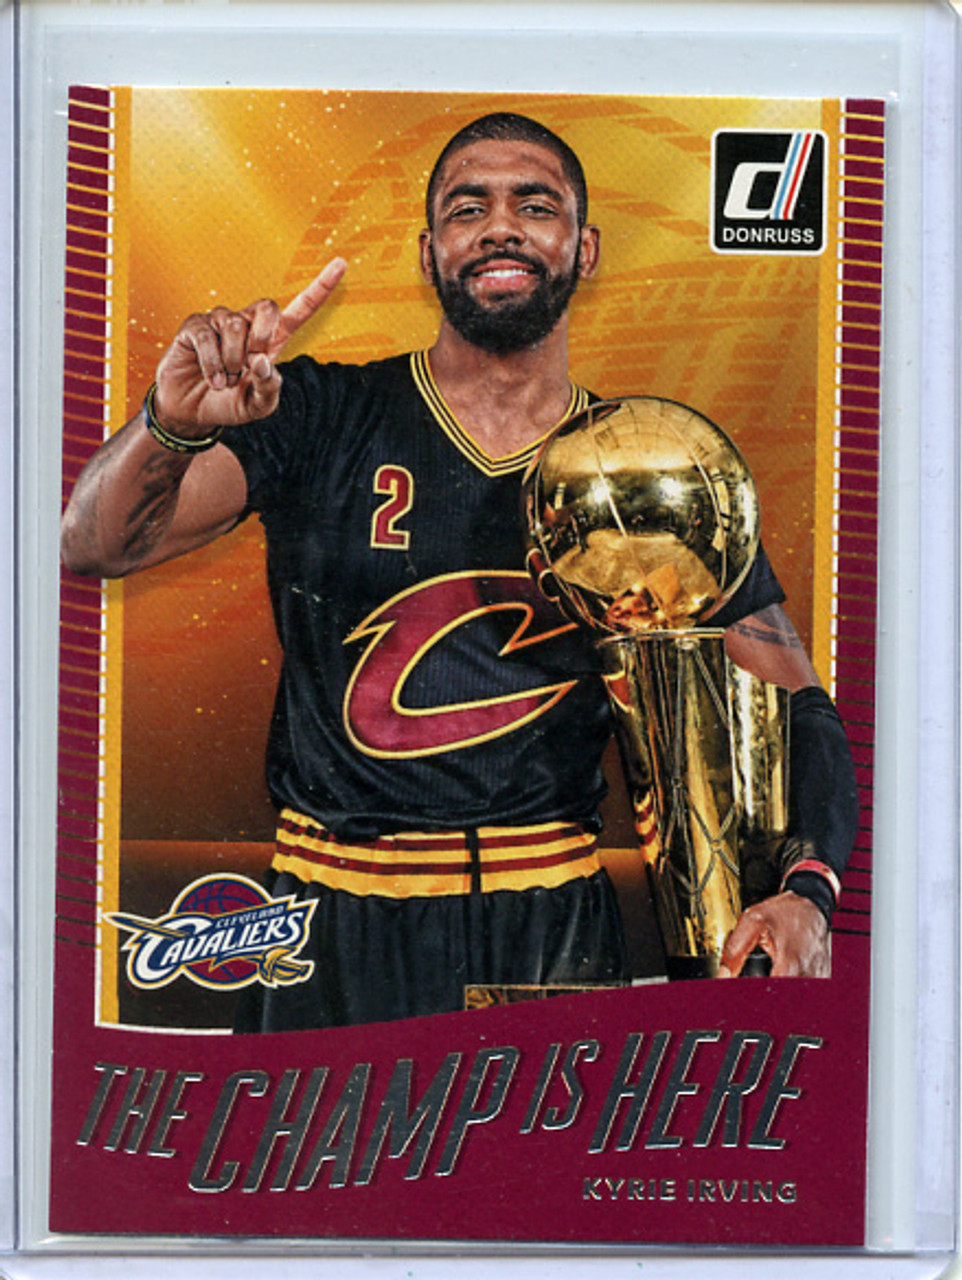 Kyrie Irving 2017-18 Donruss, The Champ is Here #2